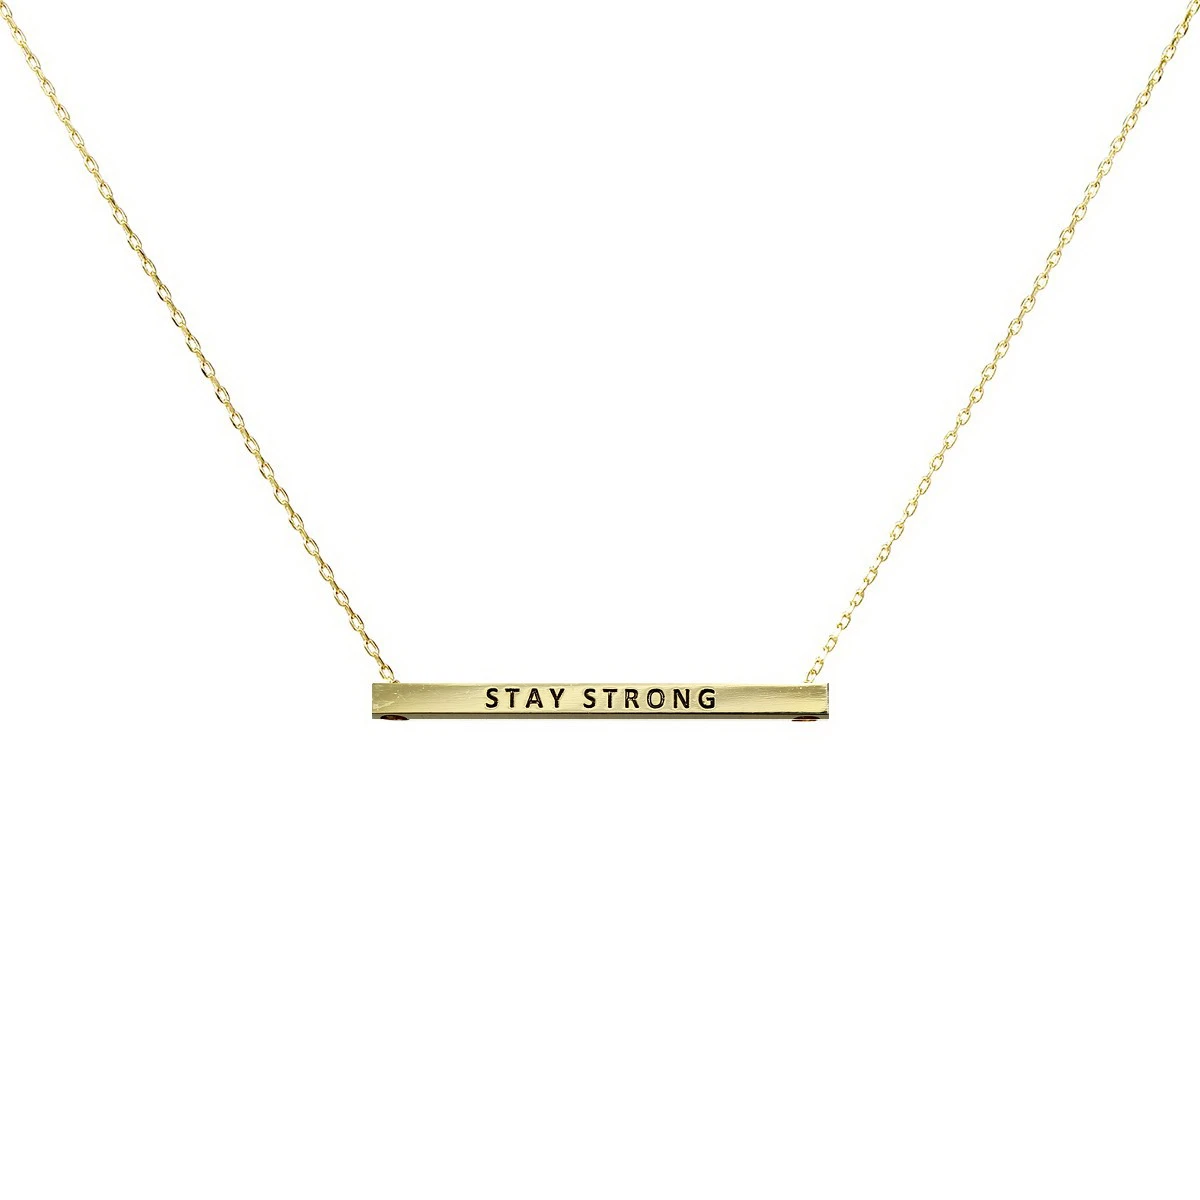 "Stay Strong" Gold Bar Pendant Necklace